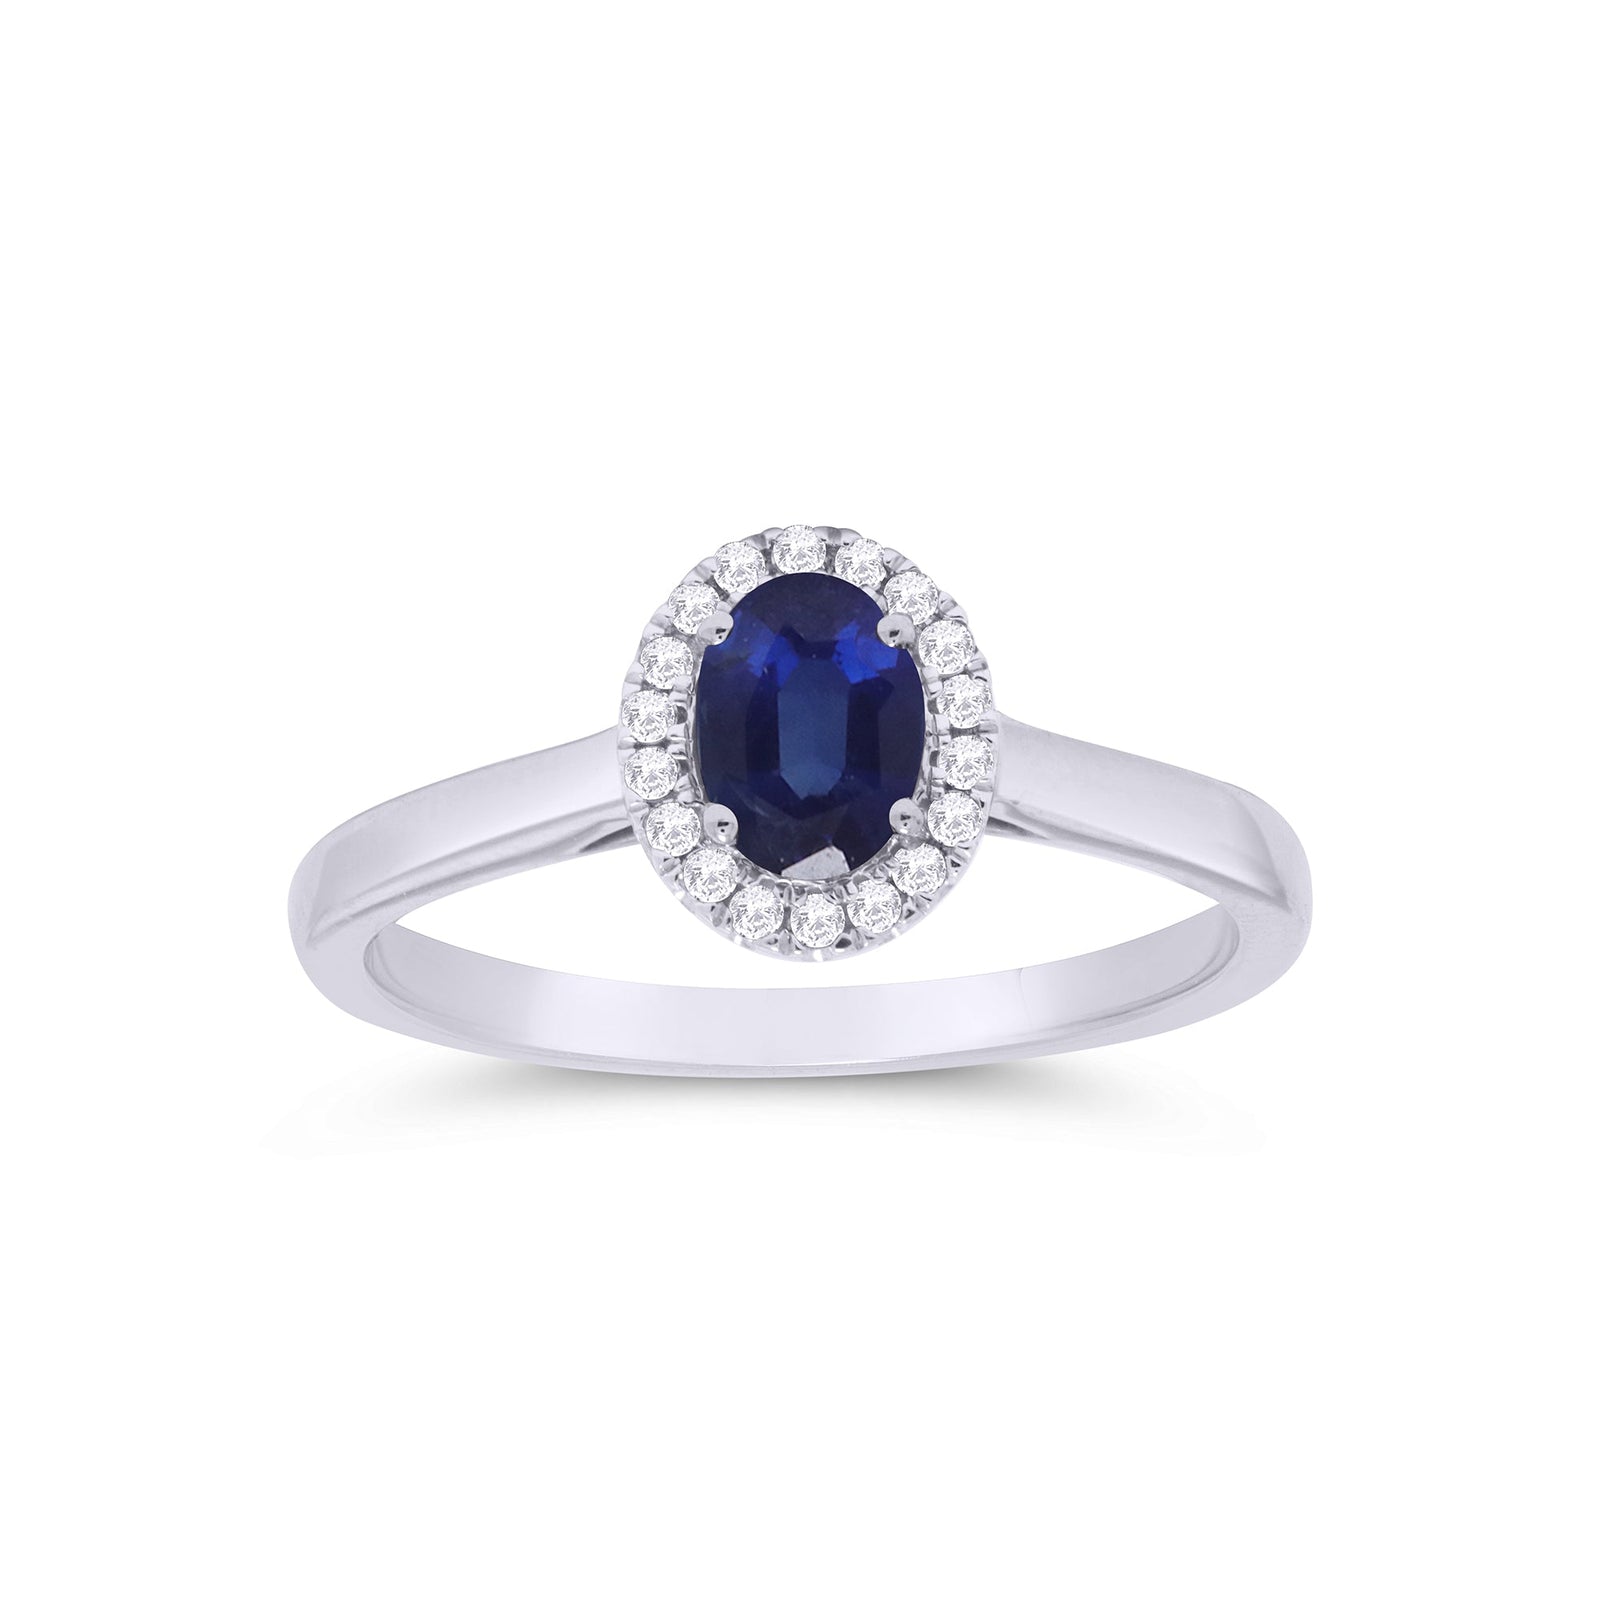 9ct white gold 6x4mm oval sapphire & diamond cluster ring 0.10ct